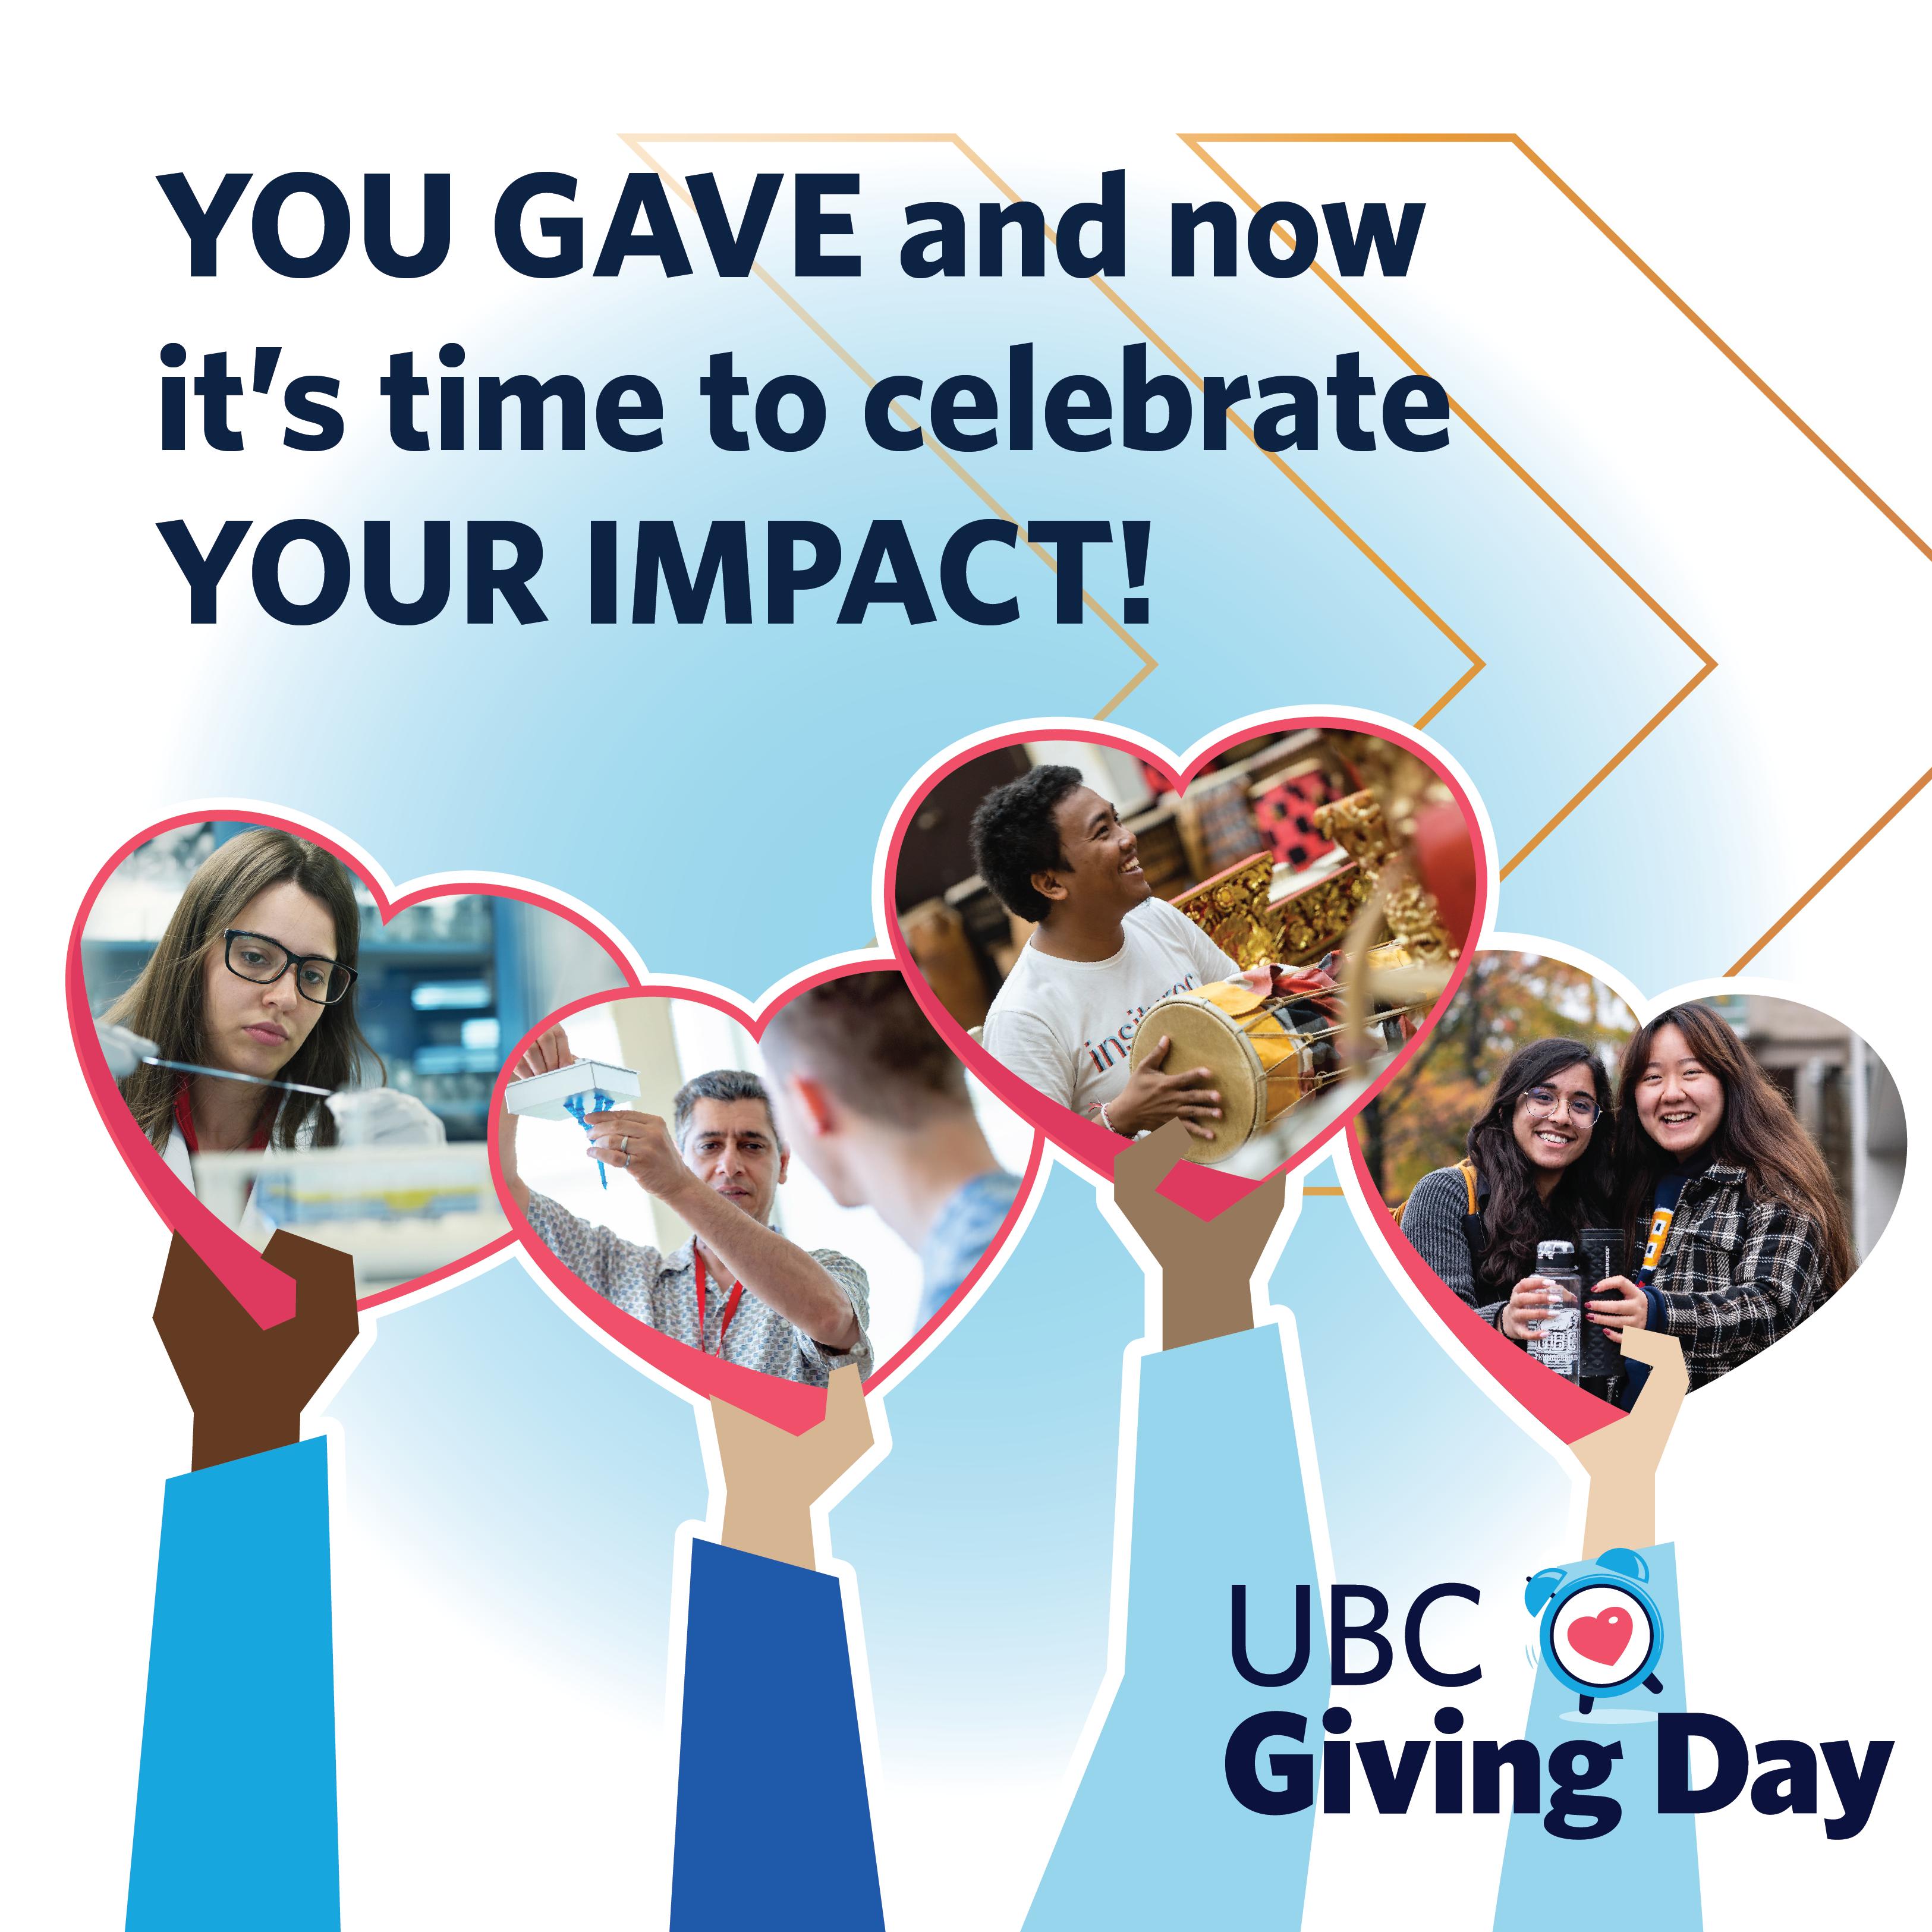 YOU GAVE and now it's time to celebrate YOUR IMPACT!